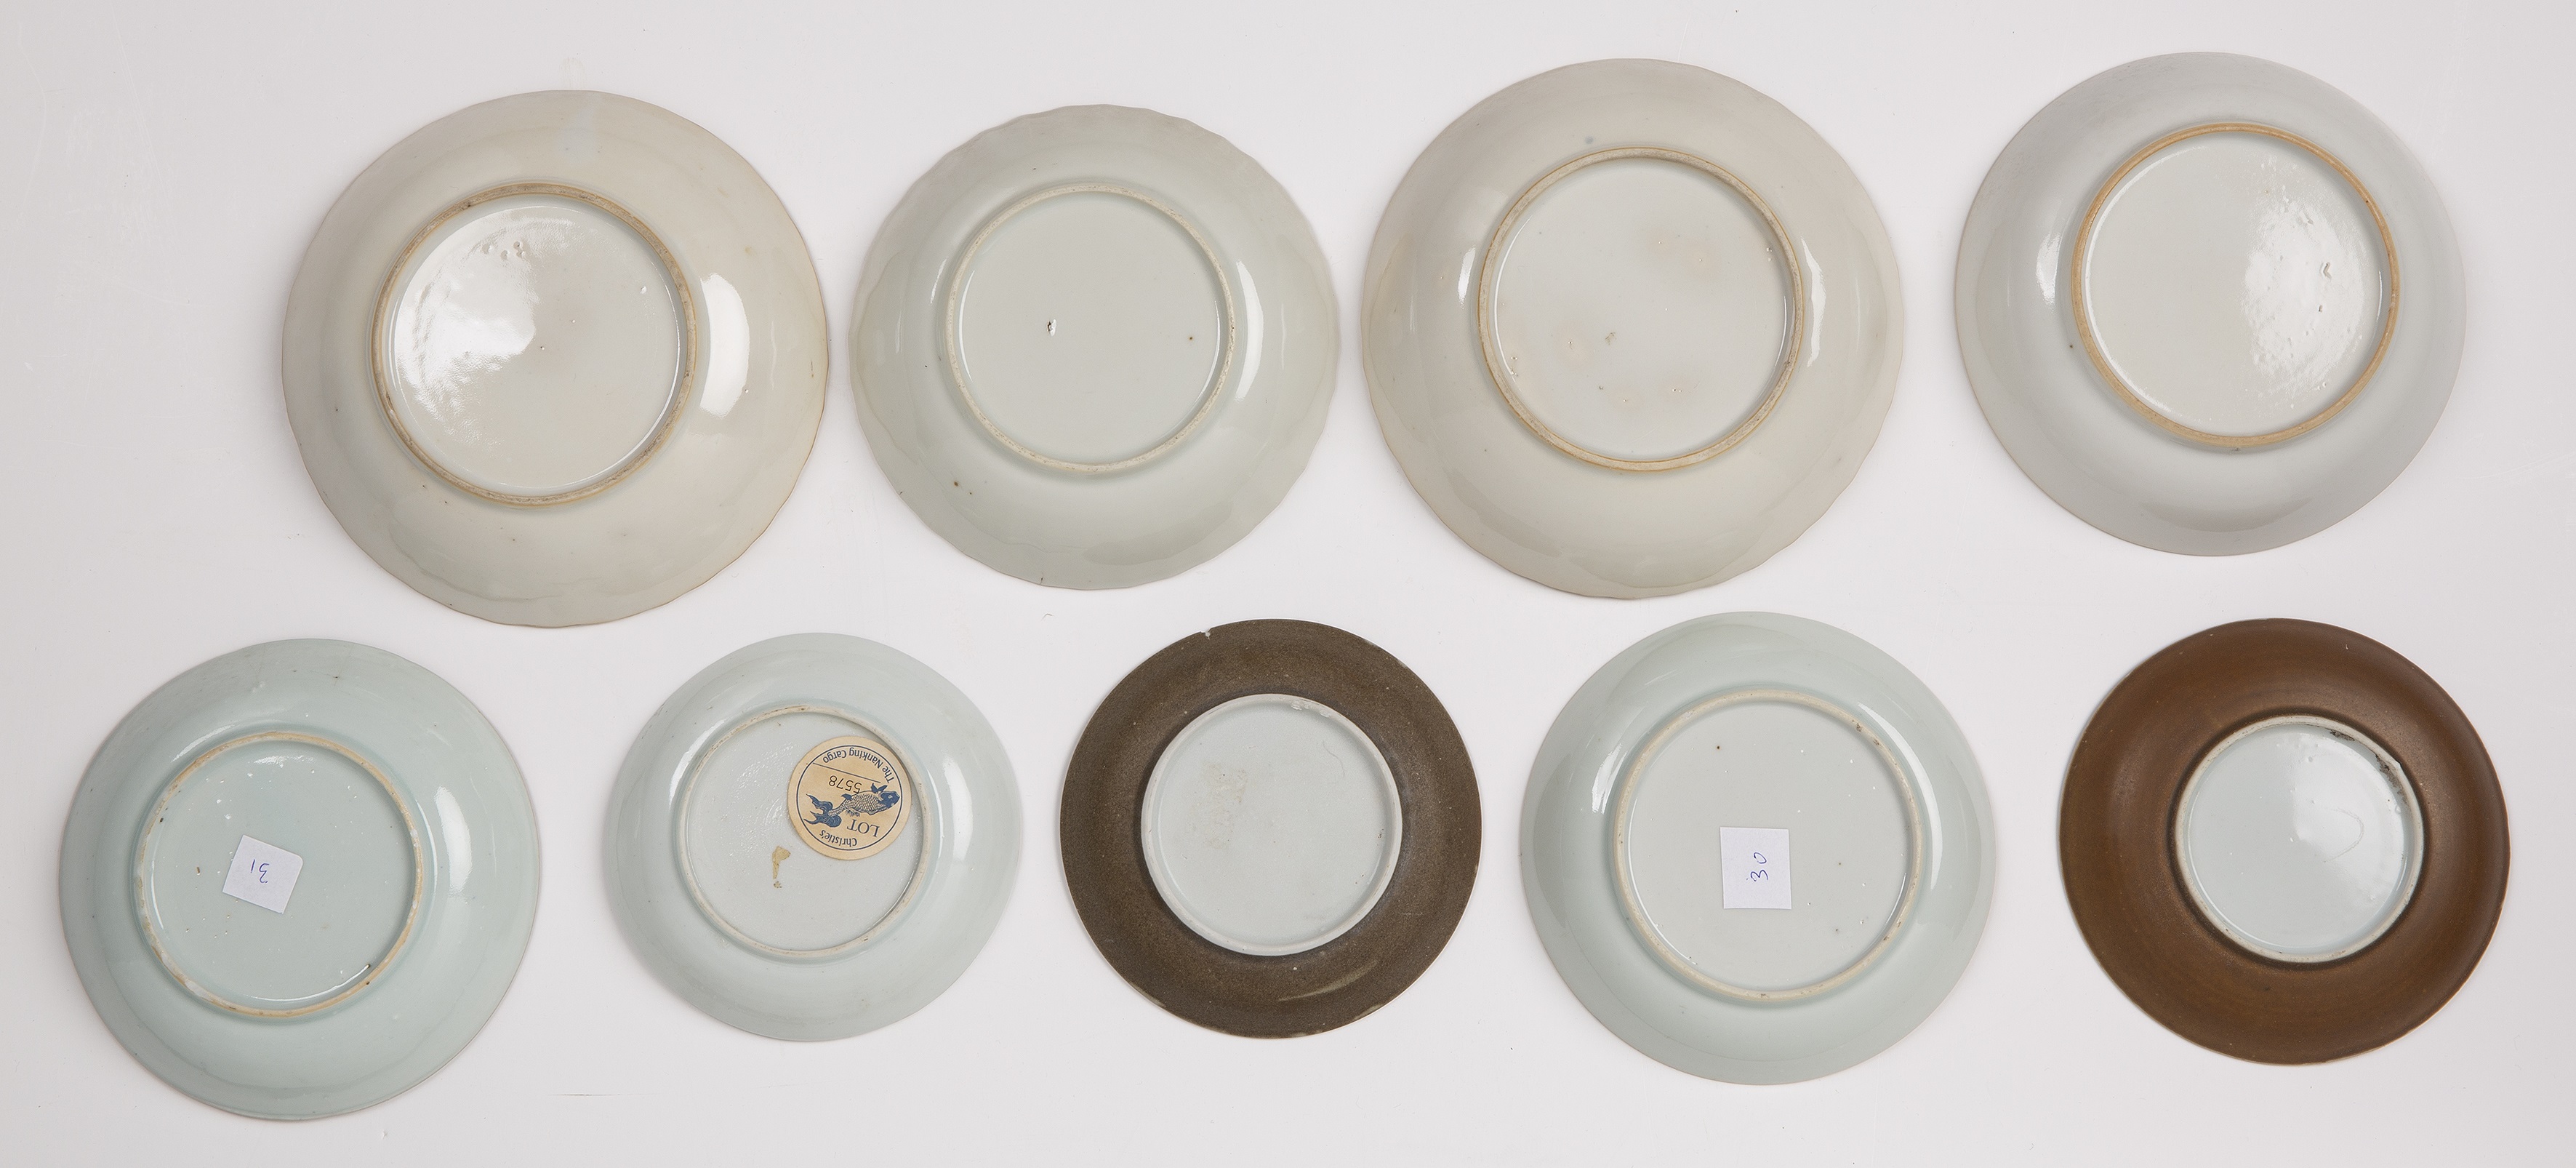 Group of various tea bowls, saucers and cups Chinese, 18th/19th Century including Nanking, Export - Image 2 of 8